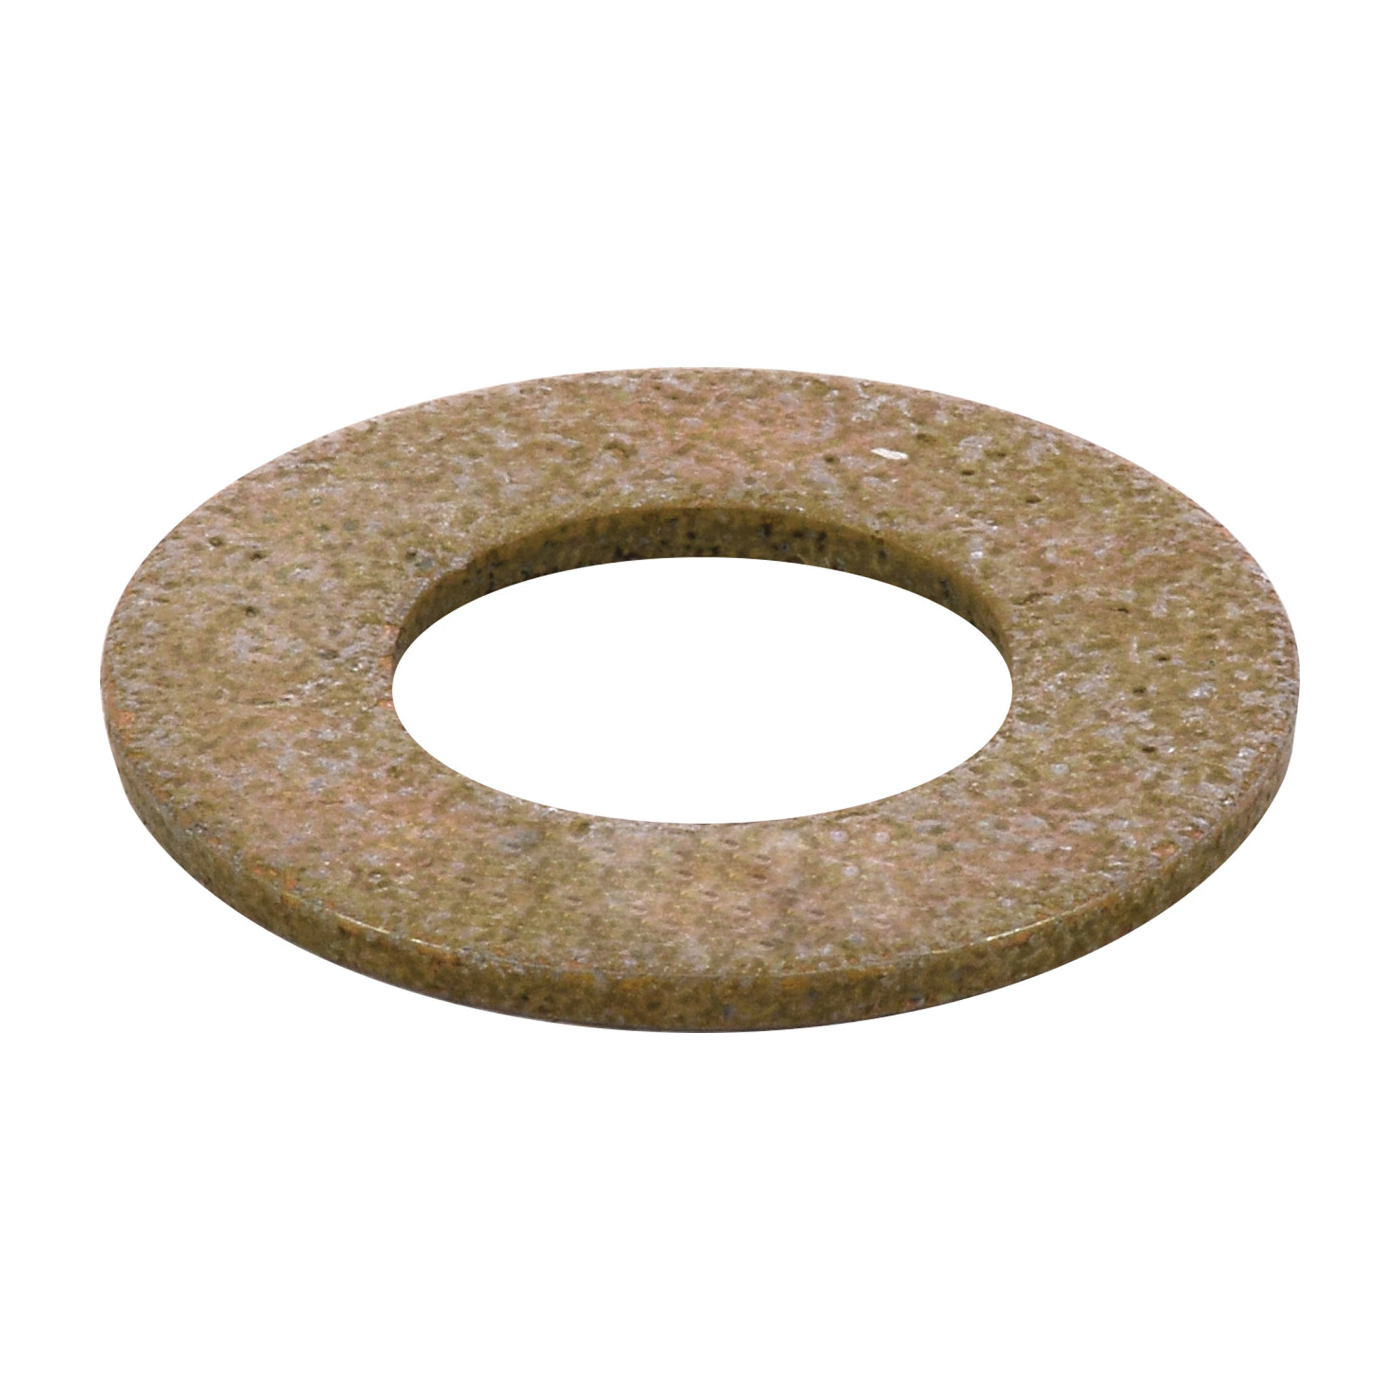 880250 Washer, 1/4 in ID, 8 Grade